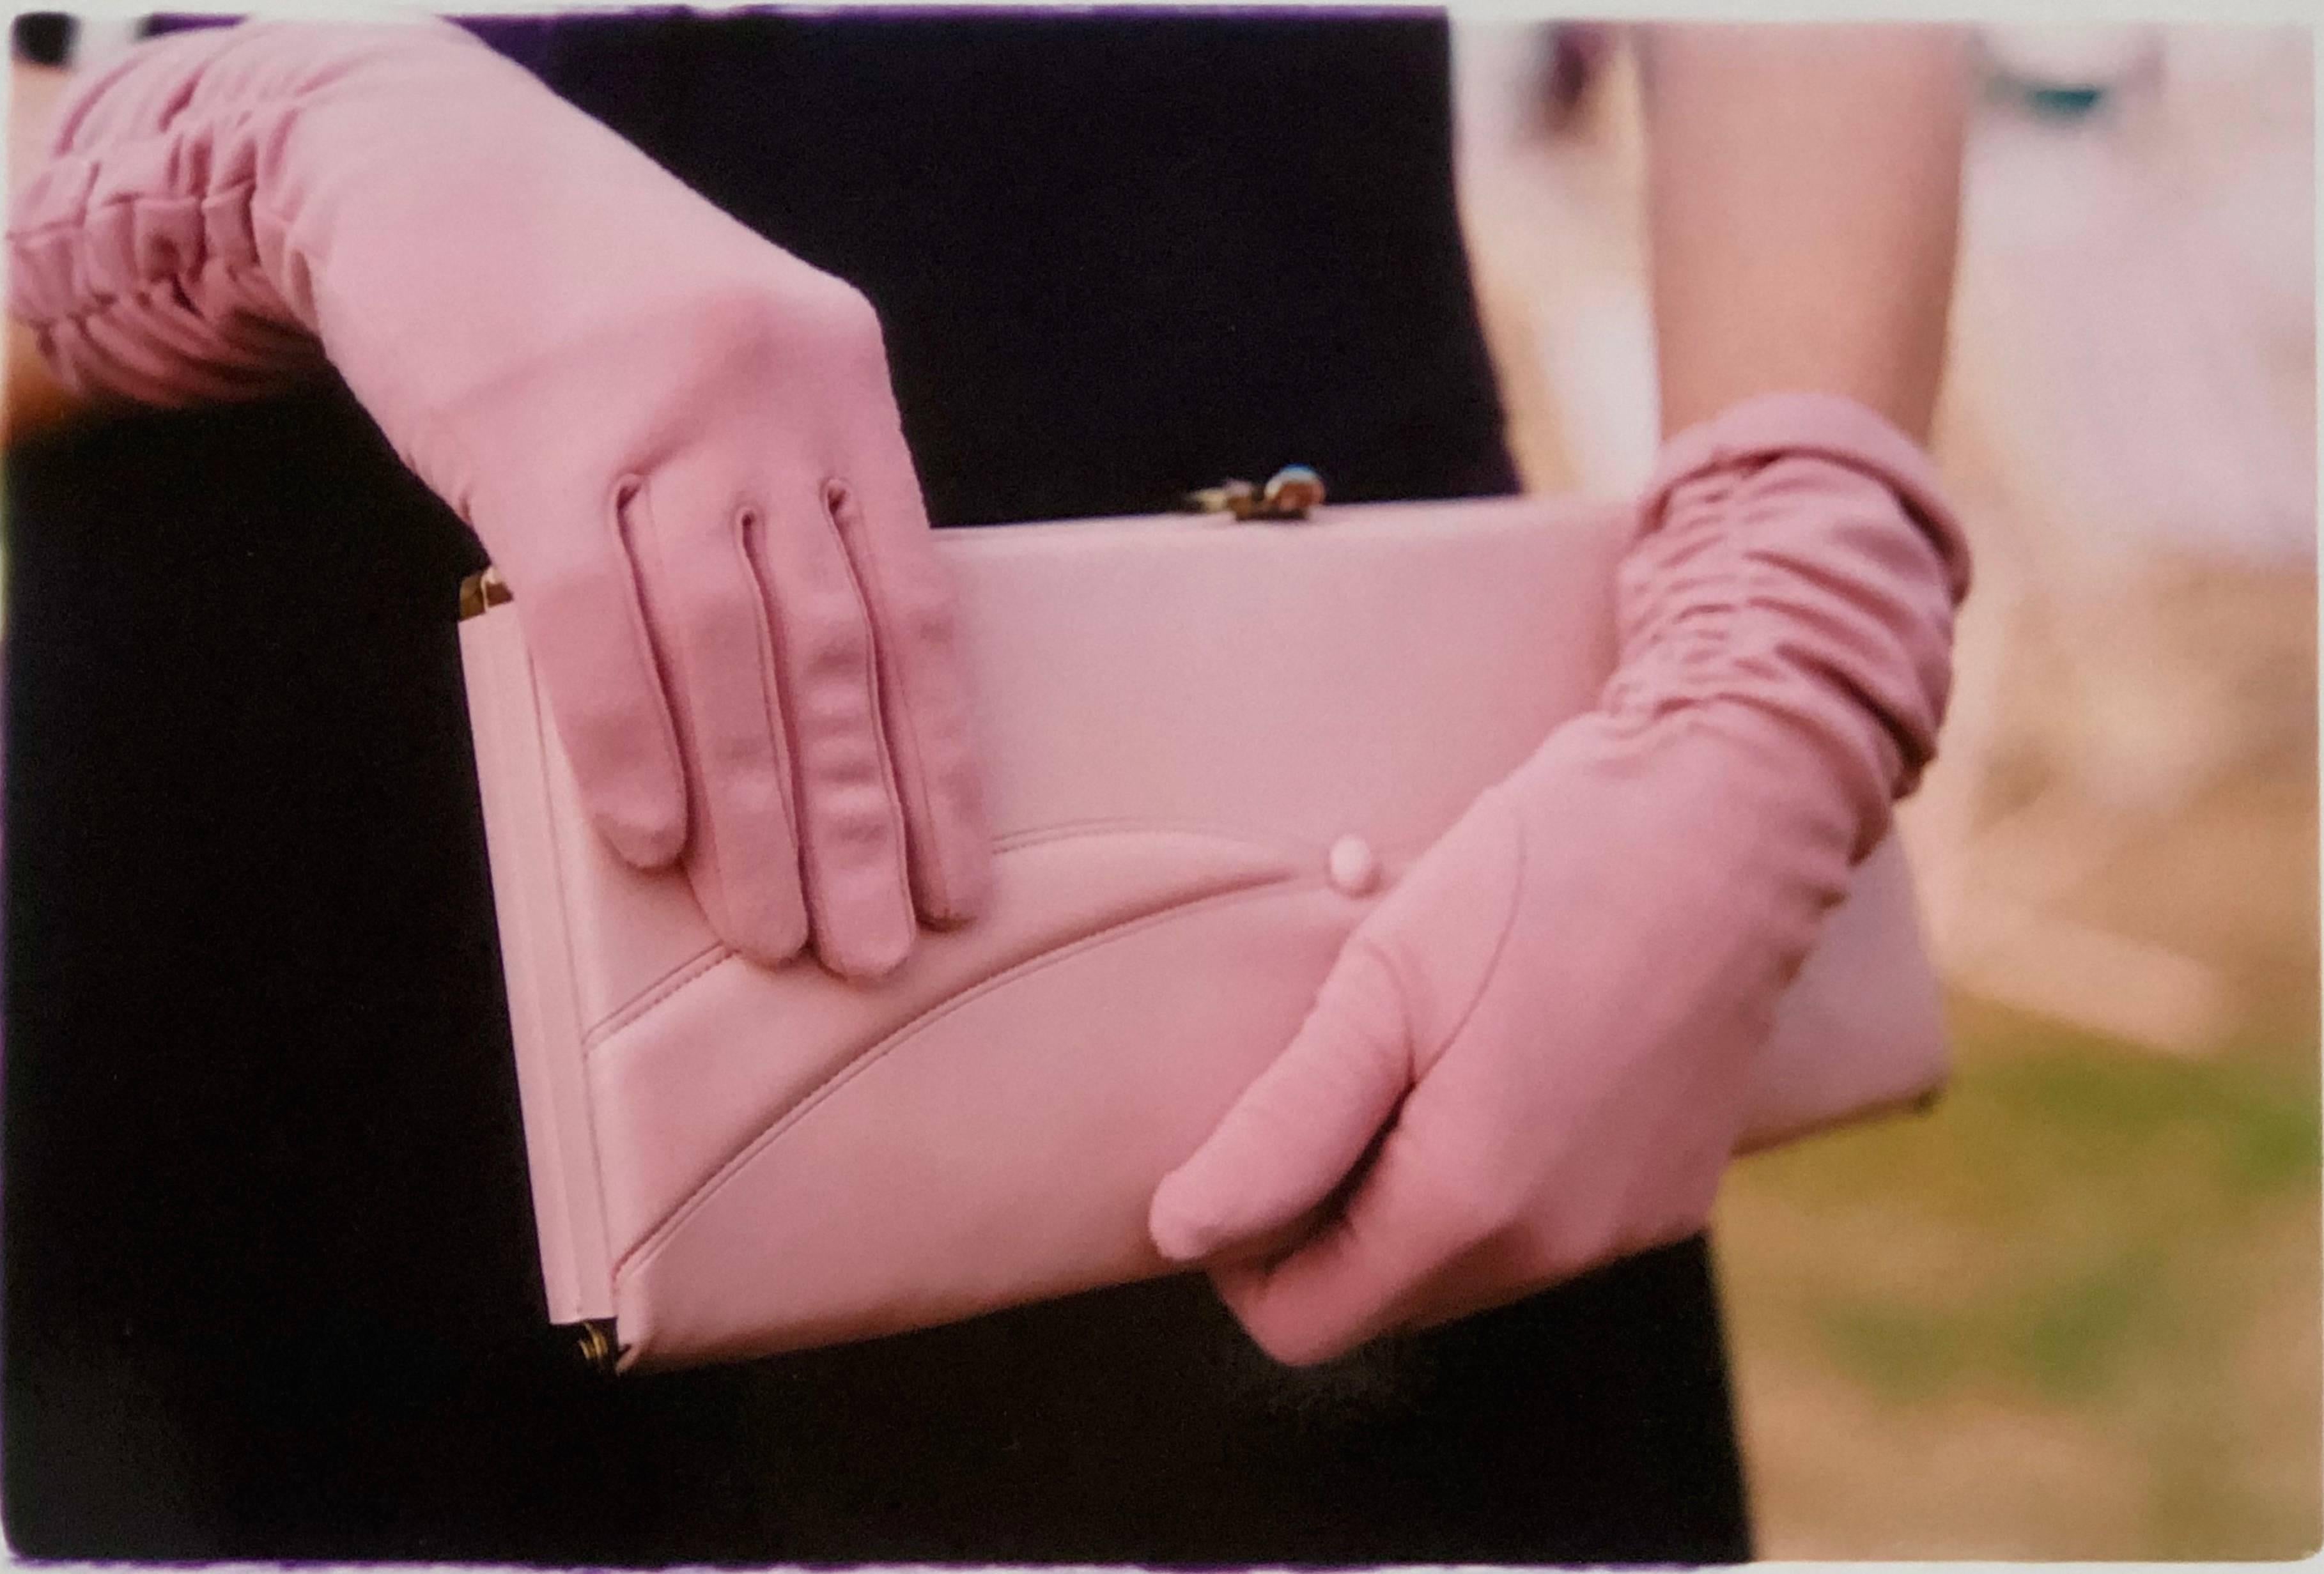 Richard Heeps Color Photograph - Pink Gloves, Goodwood, Chichester - Feminine fashion, color photography